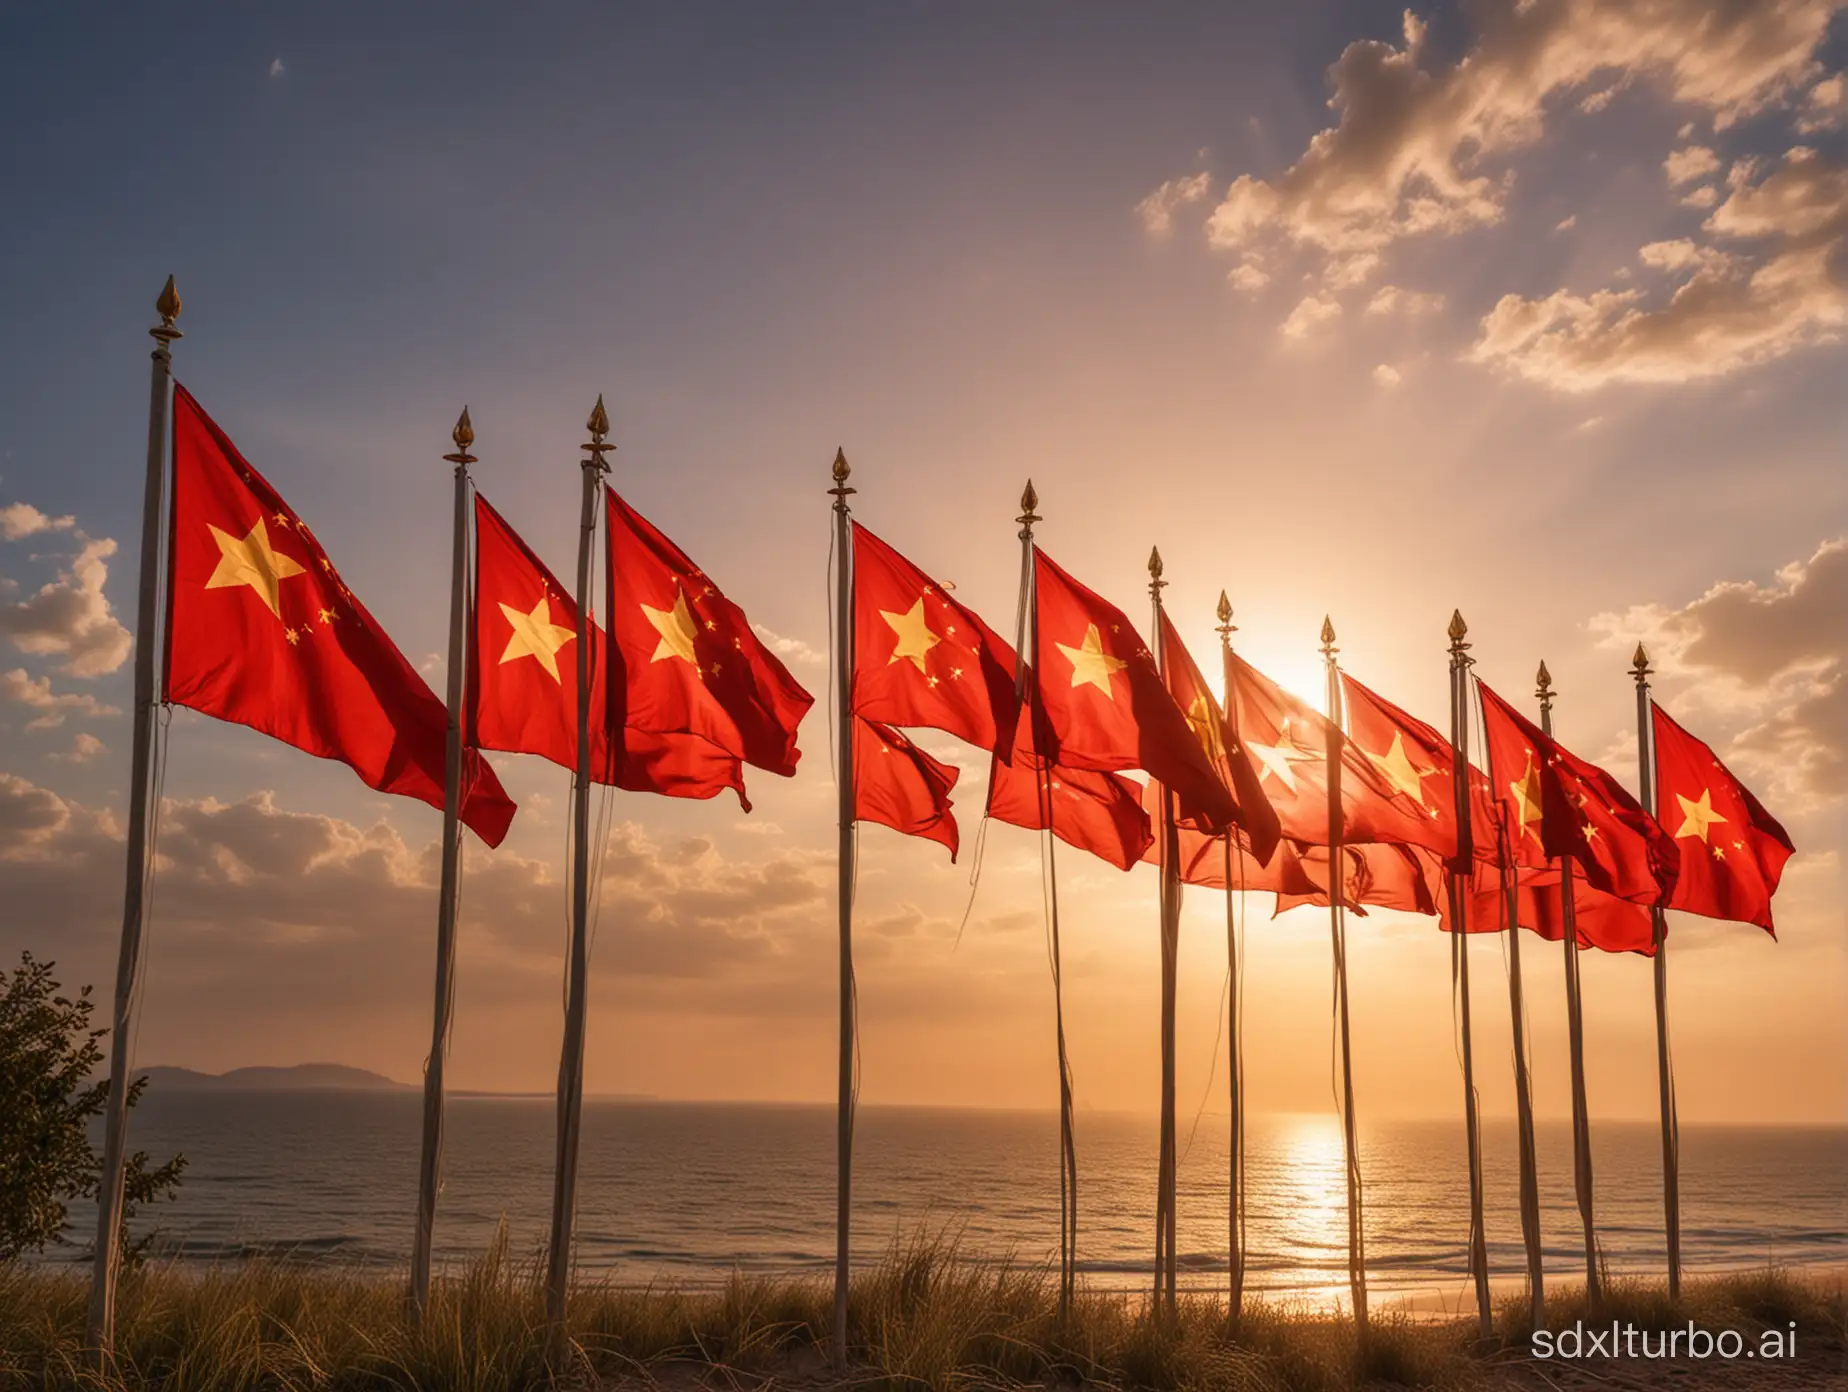 Radiance shines, the Five-Star Red Flag flies all over the world.